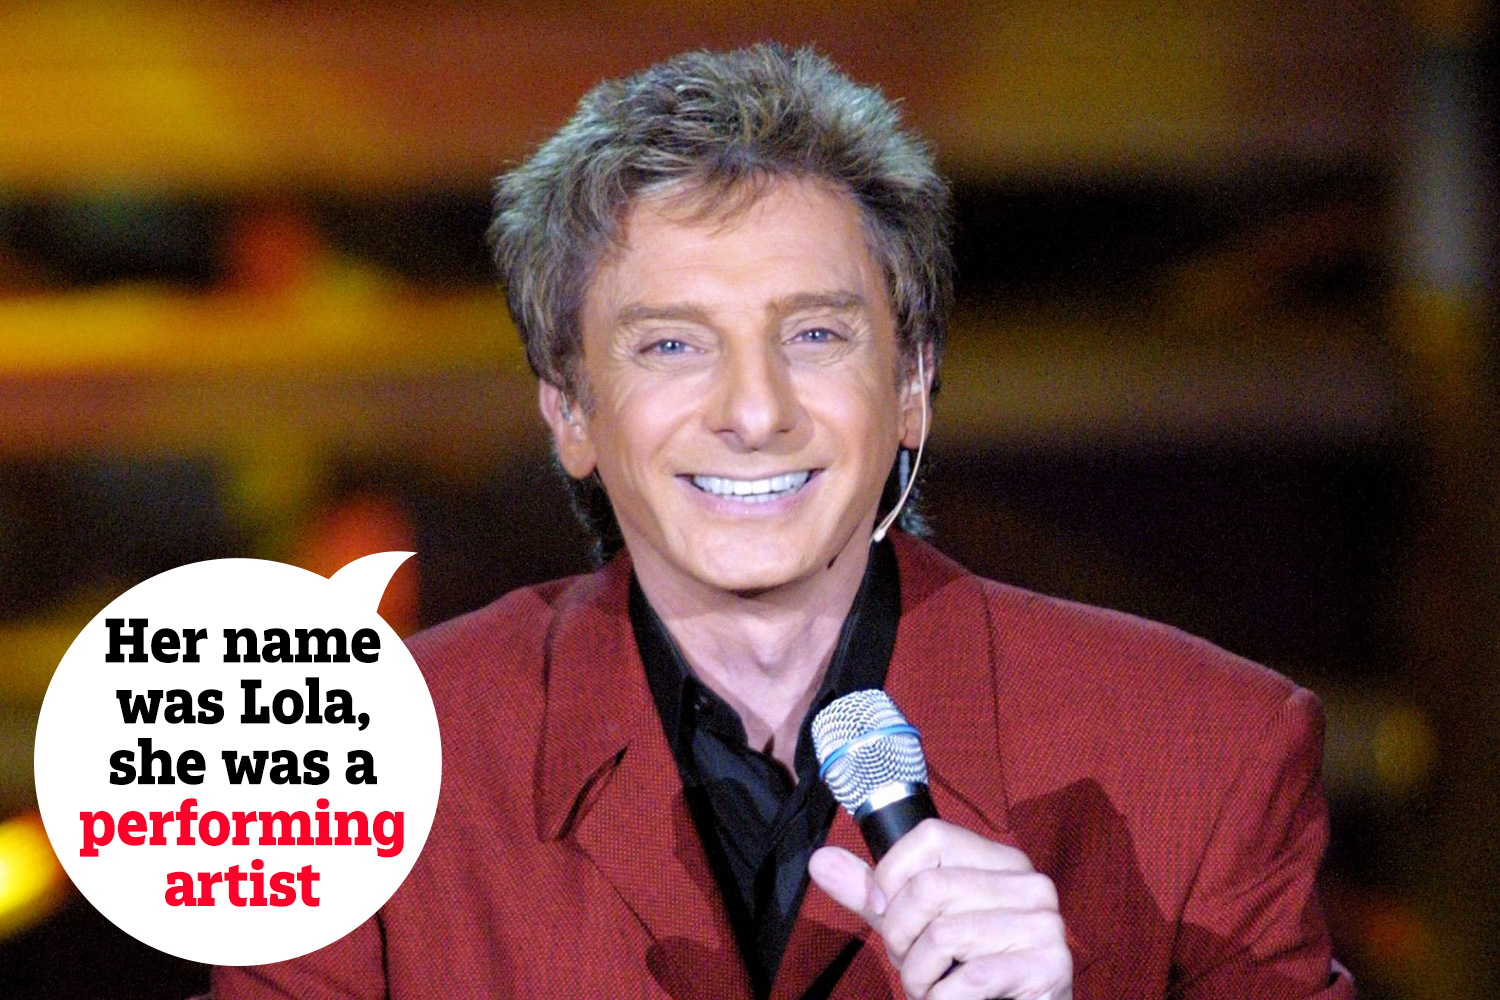 Microsoft suggests Barry Manilow's Copacabana lyrics will refer to Lola as a 'dancer', 'performer' or 'performing artist' rather than a 'showgirl'